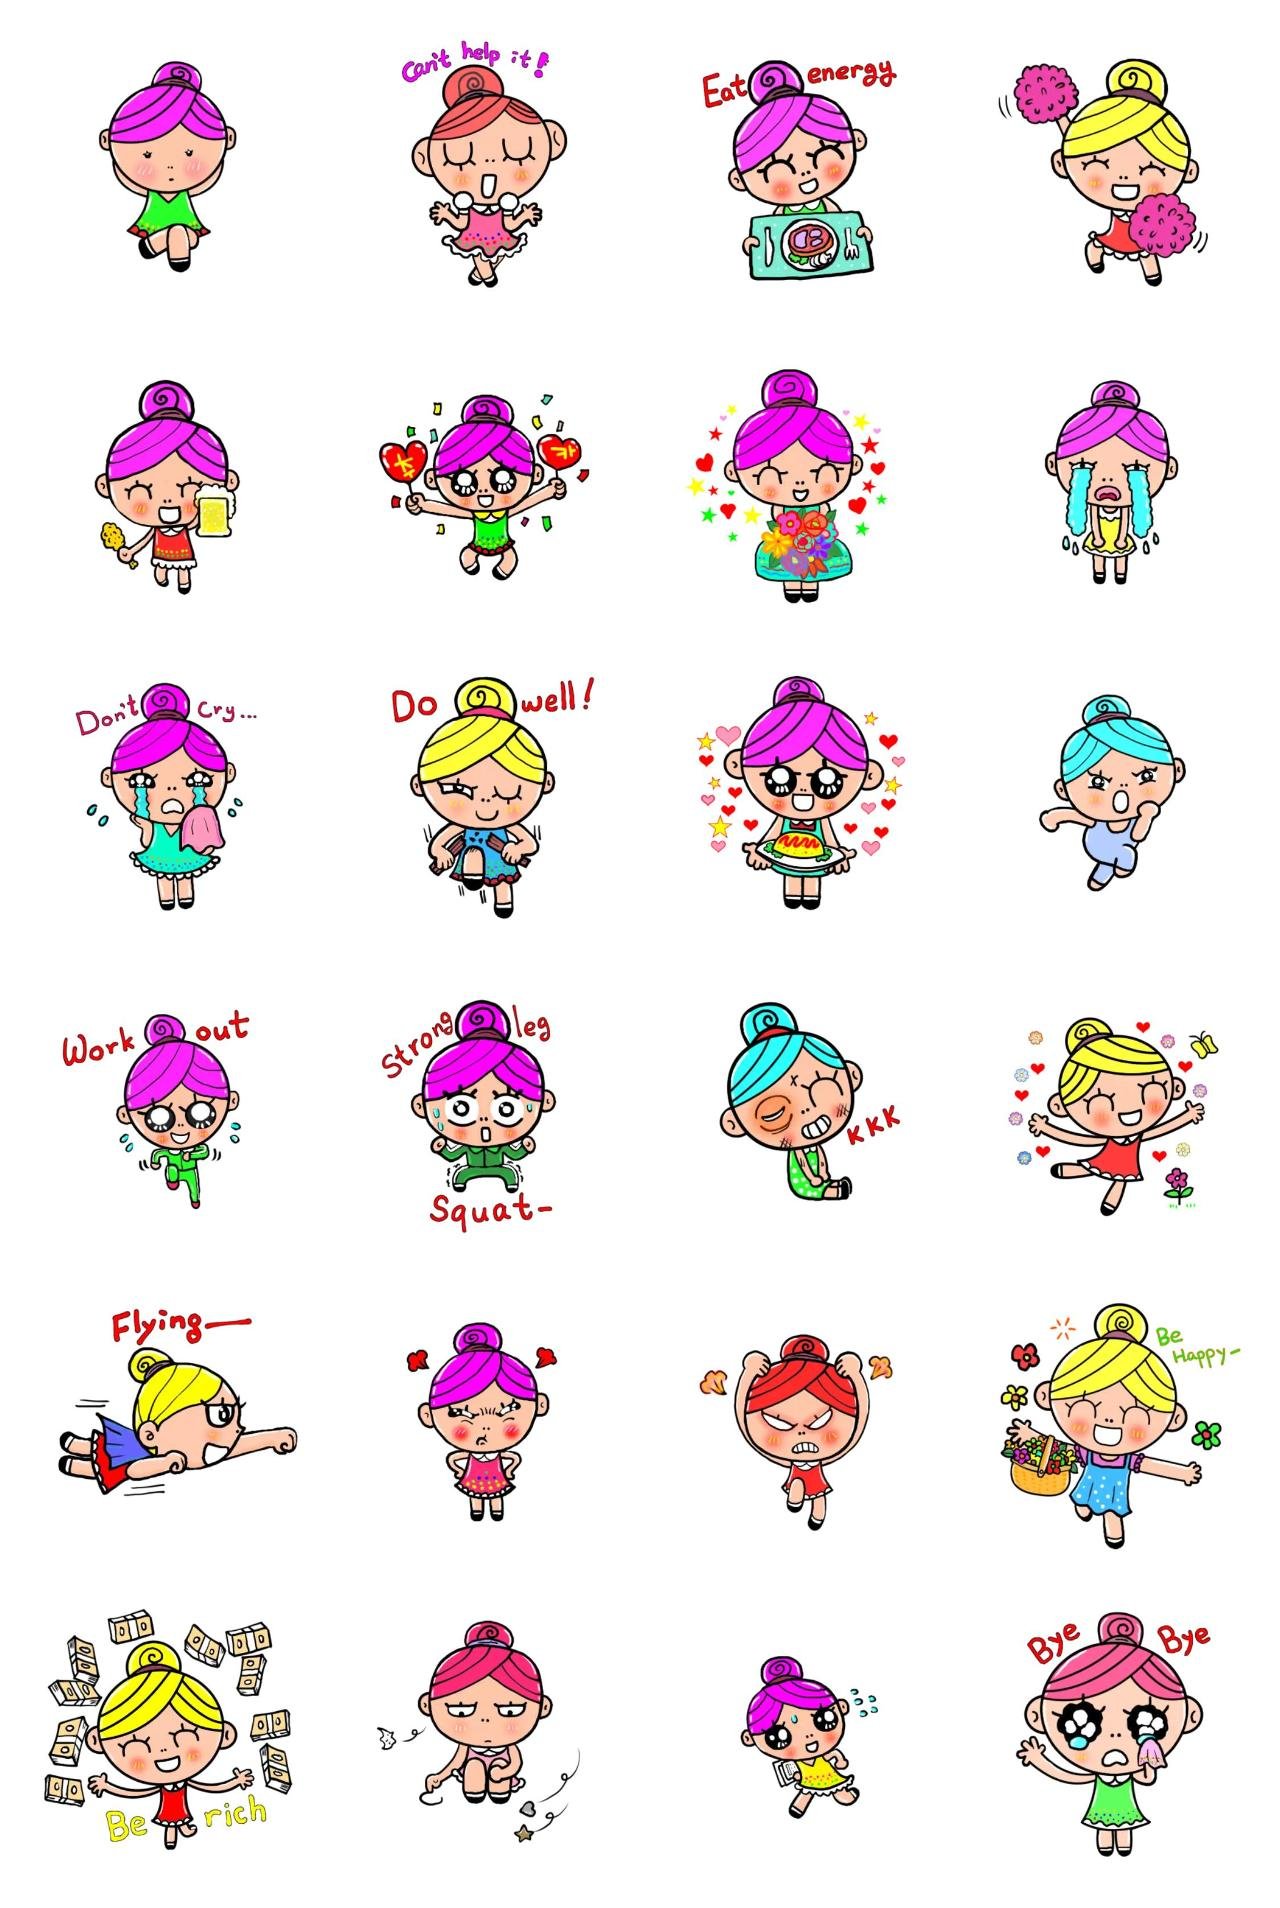 nice Jin gives you happiness People sticker pack for Whatsapp, Telegram, Signal, and others chatting and message apps